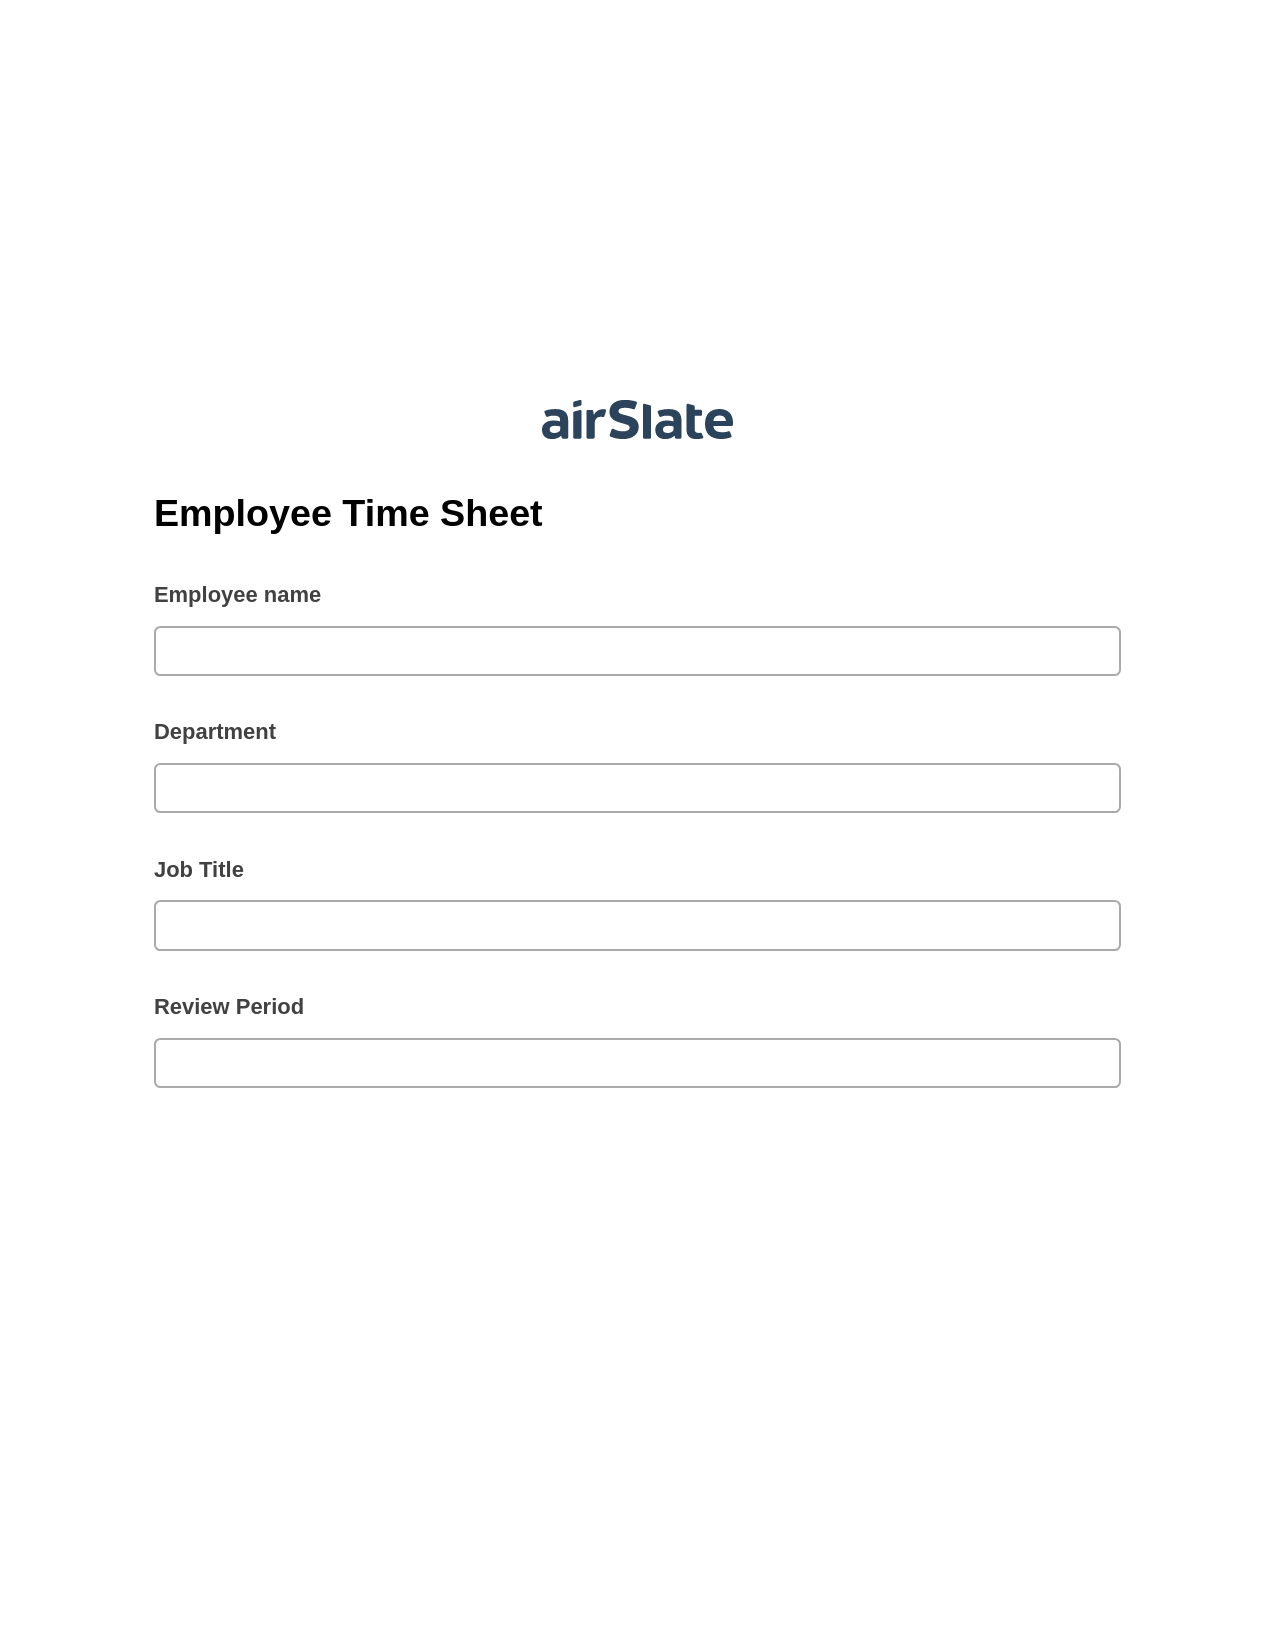 Employee Time Sheet Pre-fill Dropdowns from Airtable, Lock the Slate Bot, Export to Smartsheet